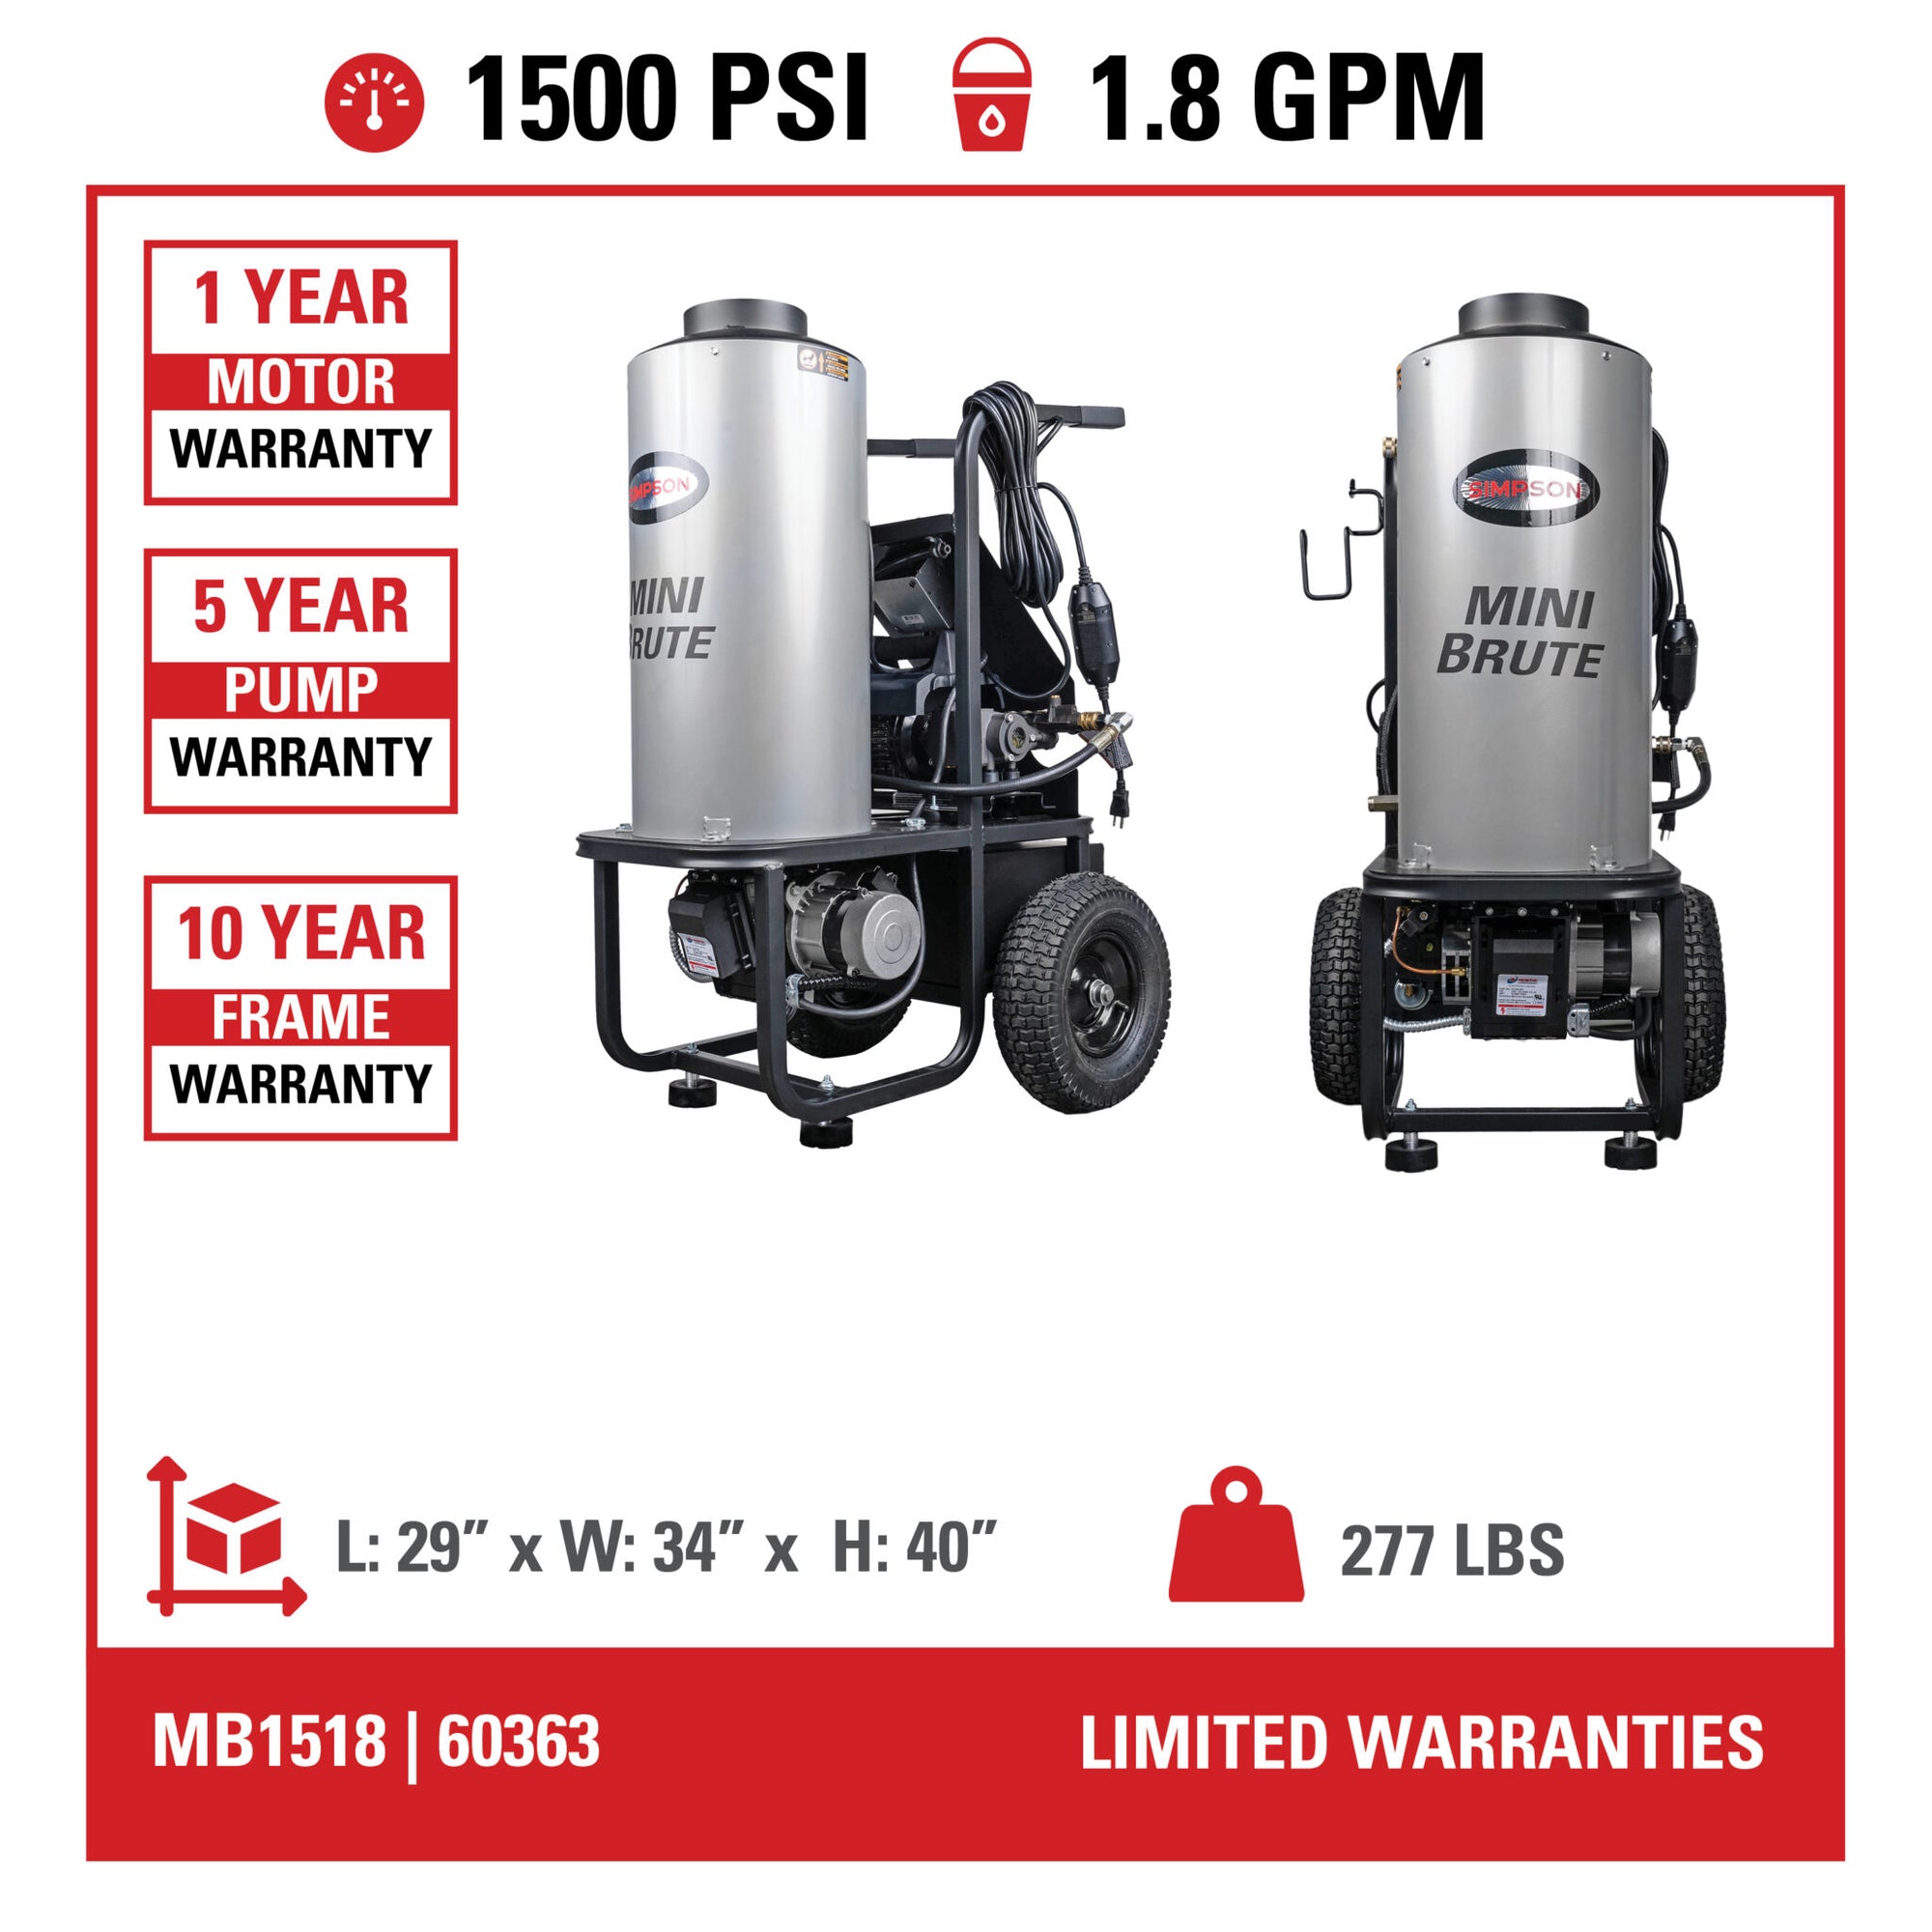 Simpson MB1518 Brute Series Pressure Washer 1500 PSI 1.8 GPM Hot Water Electric New